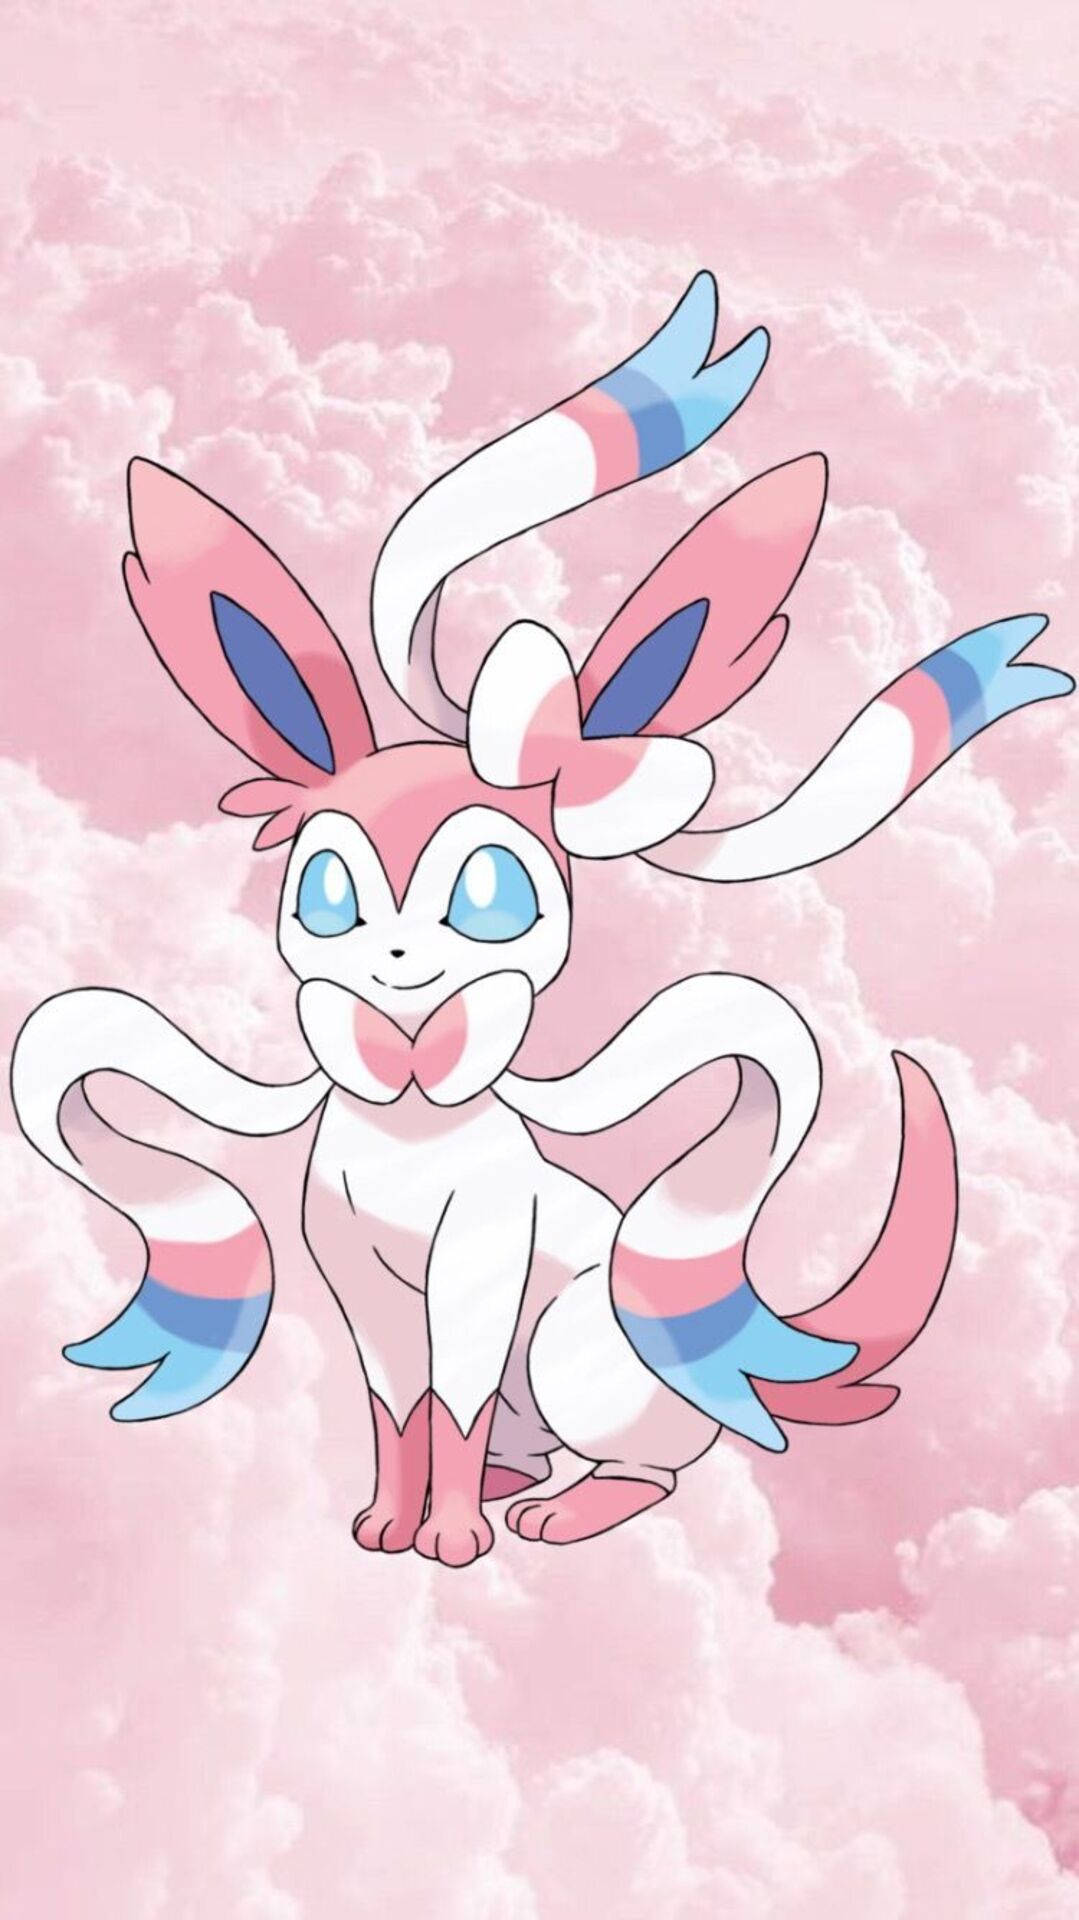 A Gentle Sylveon Enveloped In Beautiful Pink Clouds